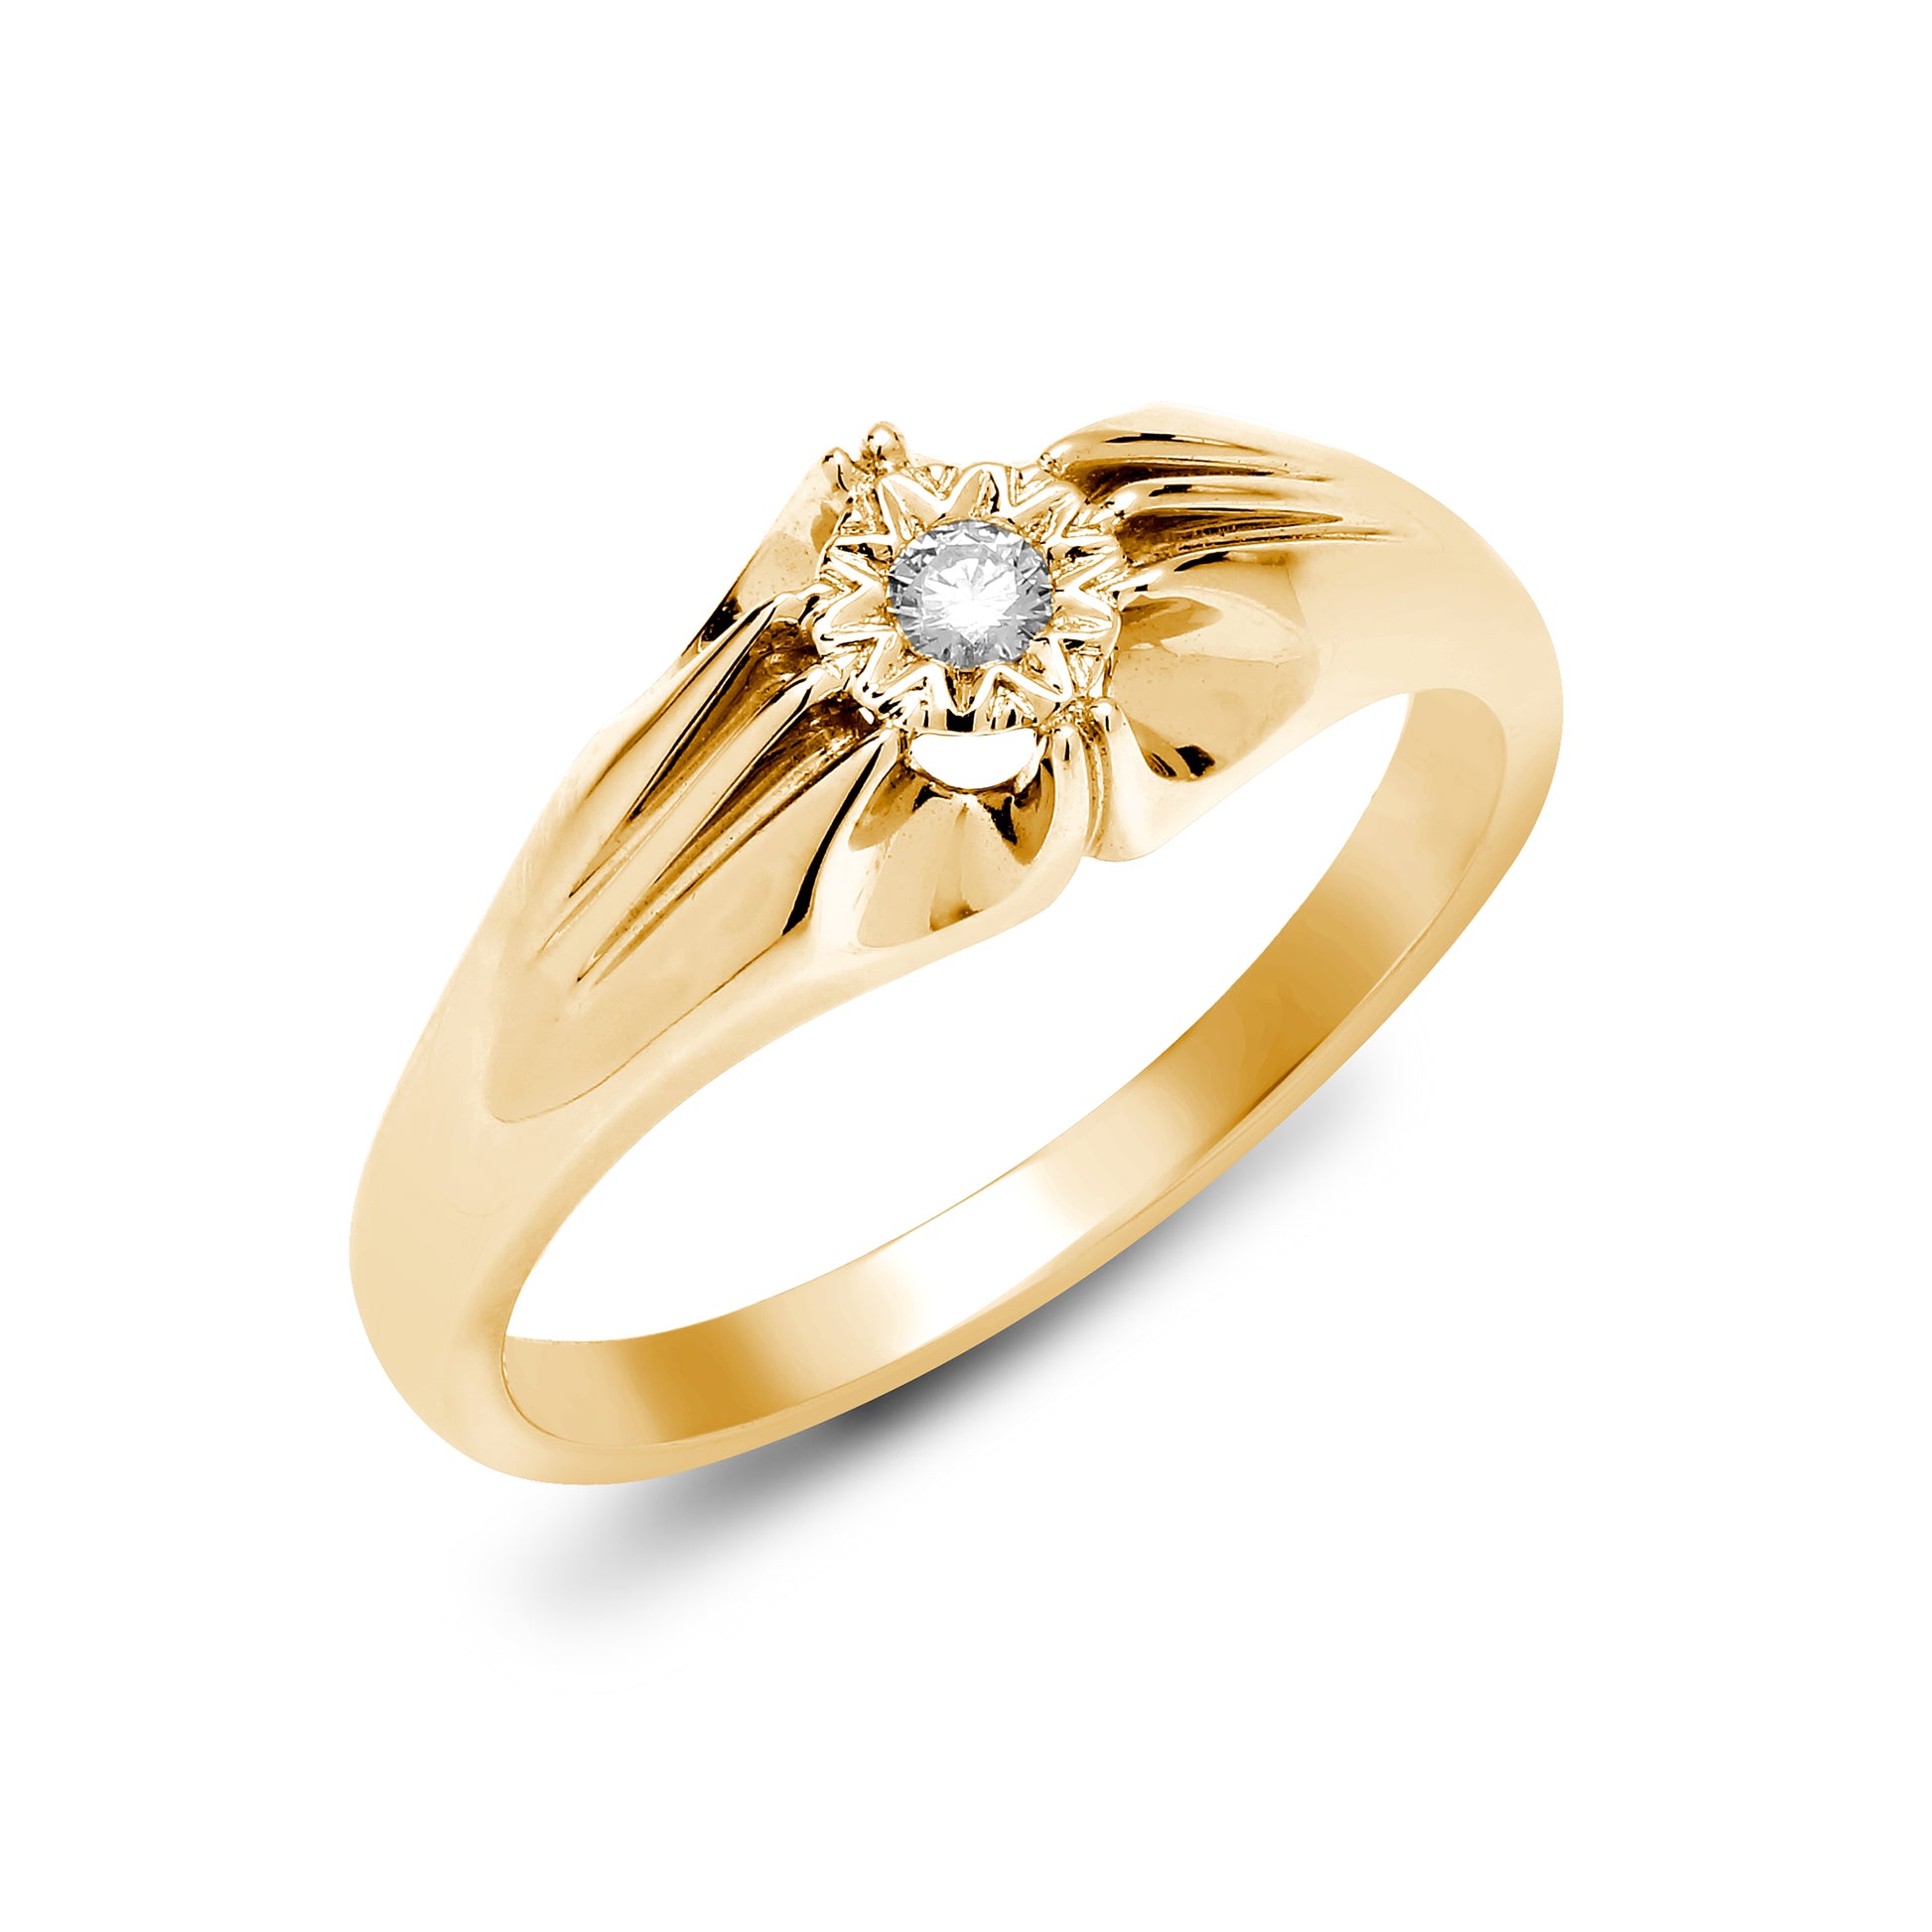 Mens 9ct Gold  0.1ct Diamond Gypsy Solitaire Ring 8mm - 9R523